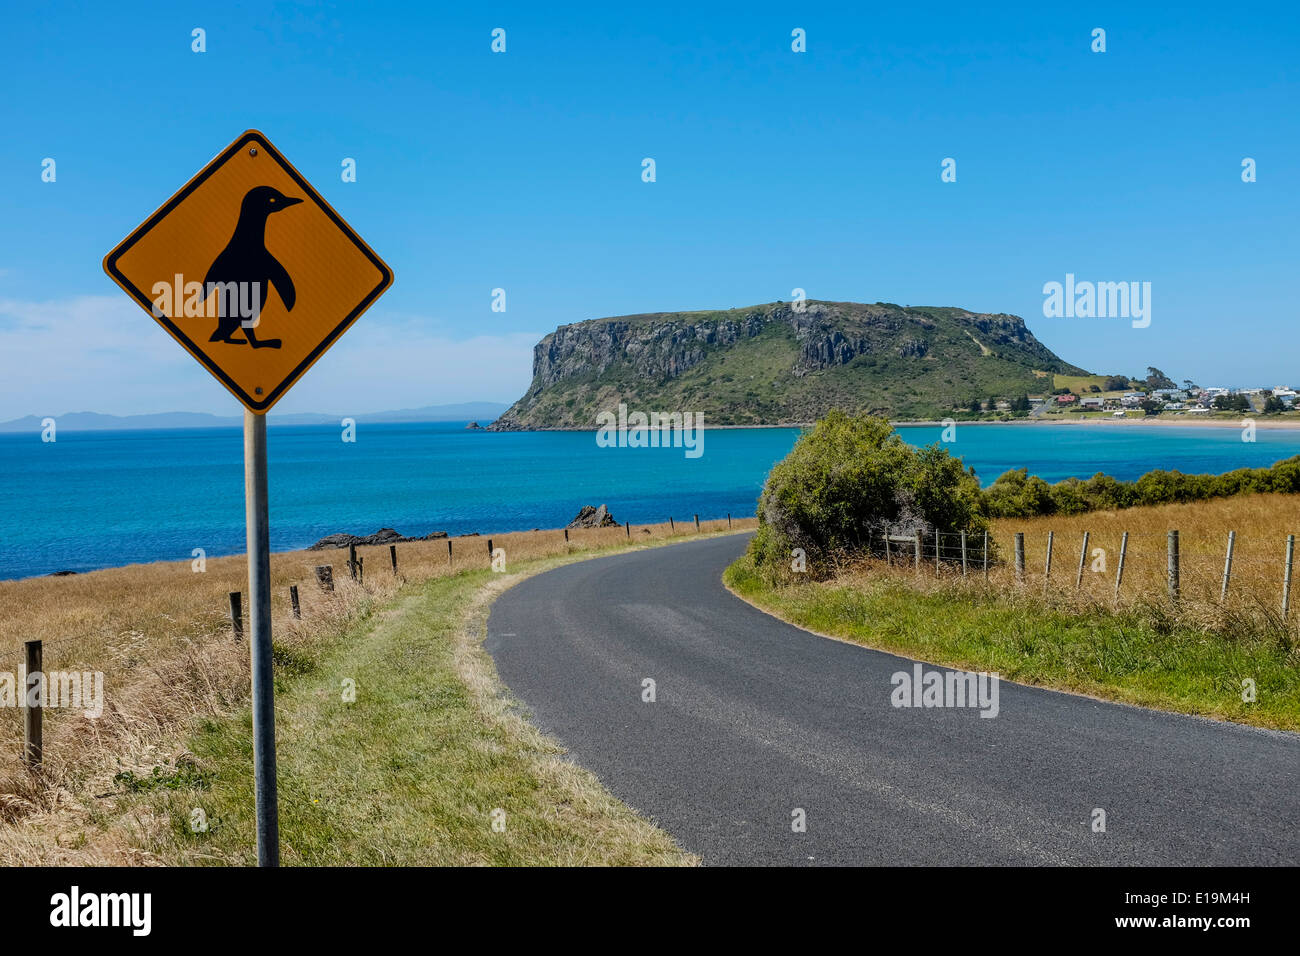 The geological formation known as The Nut at Stanley in Tasmania Stock Photo